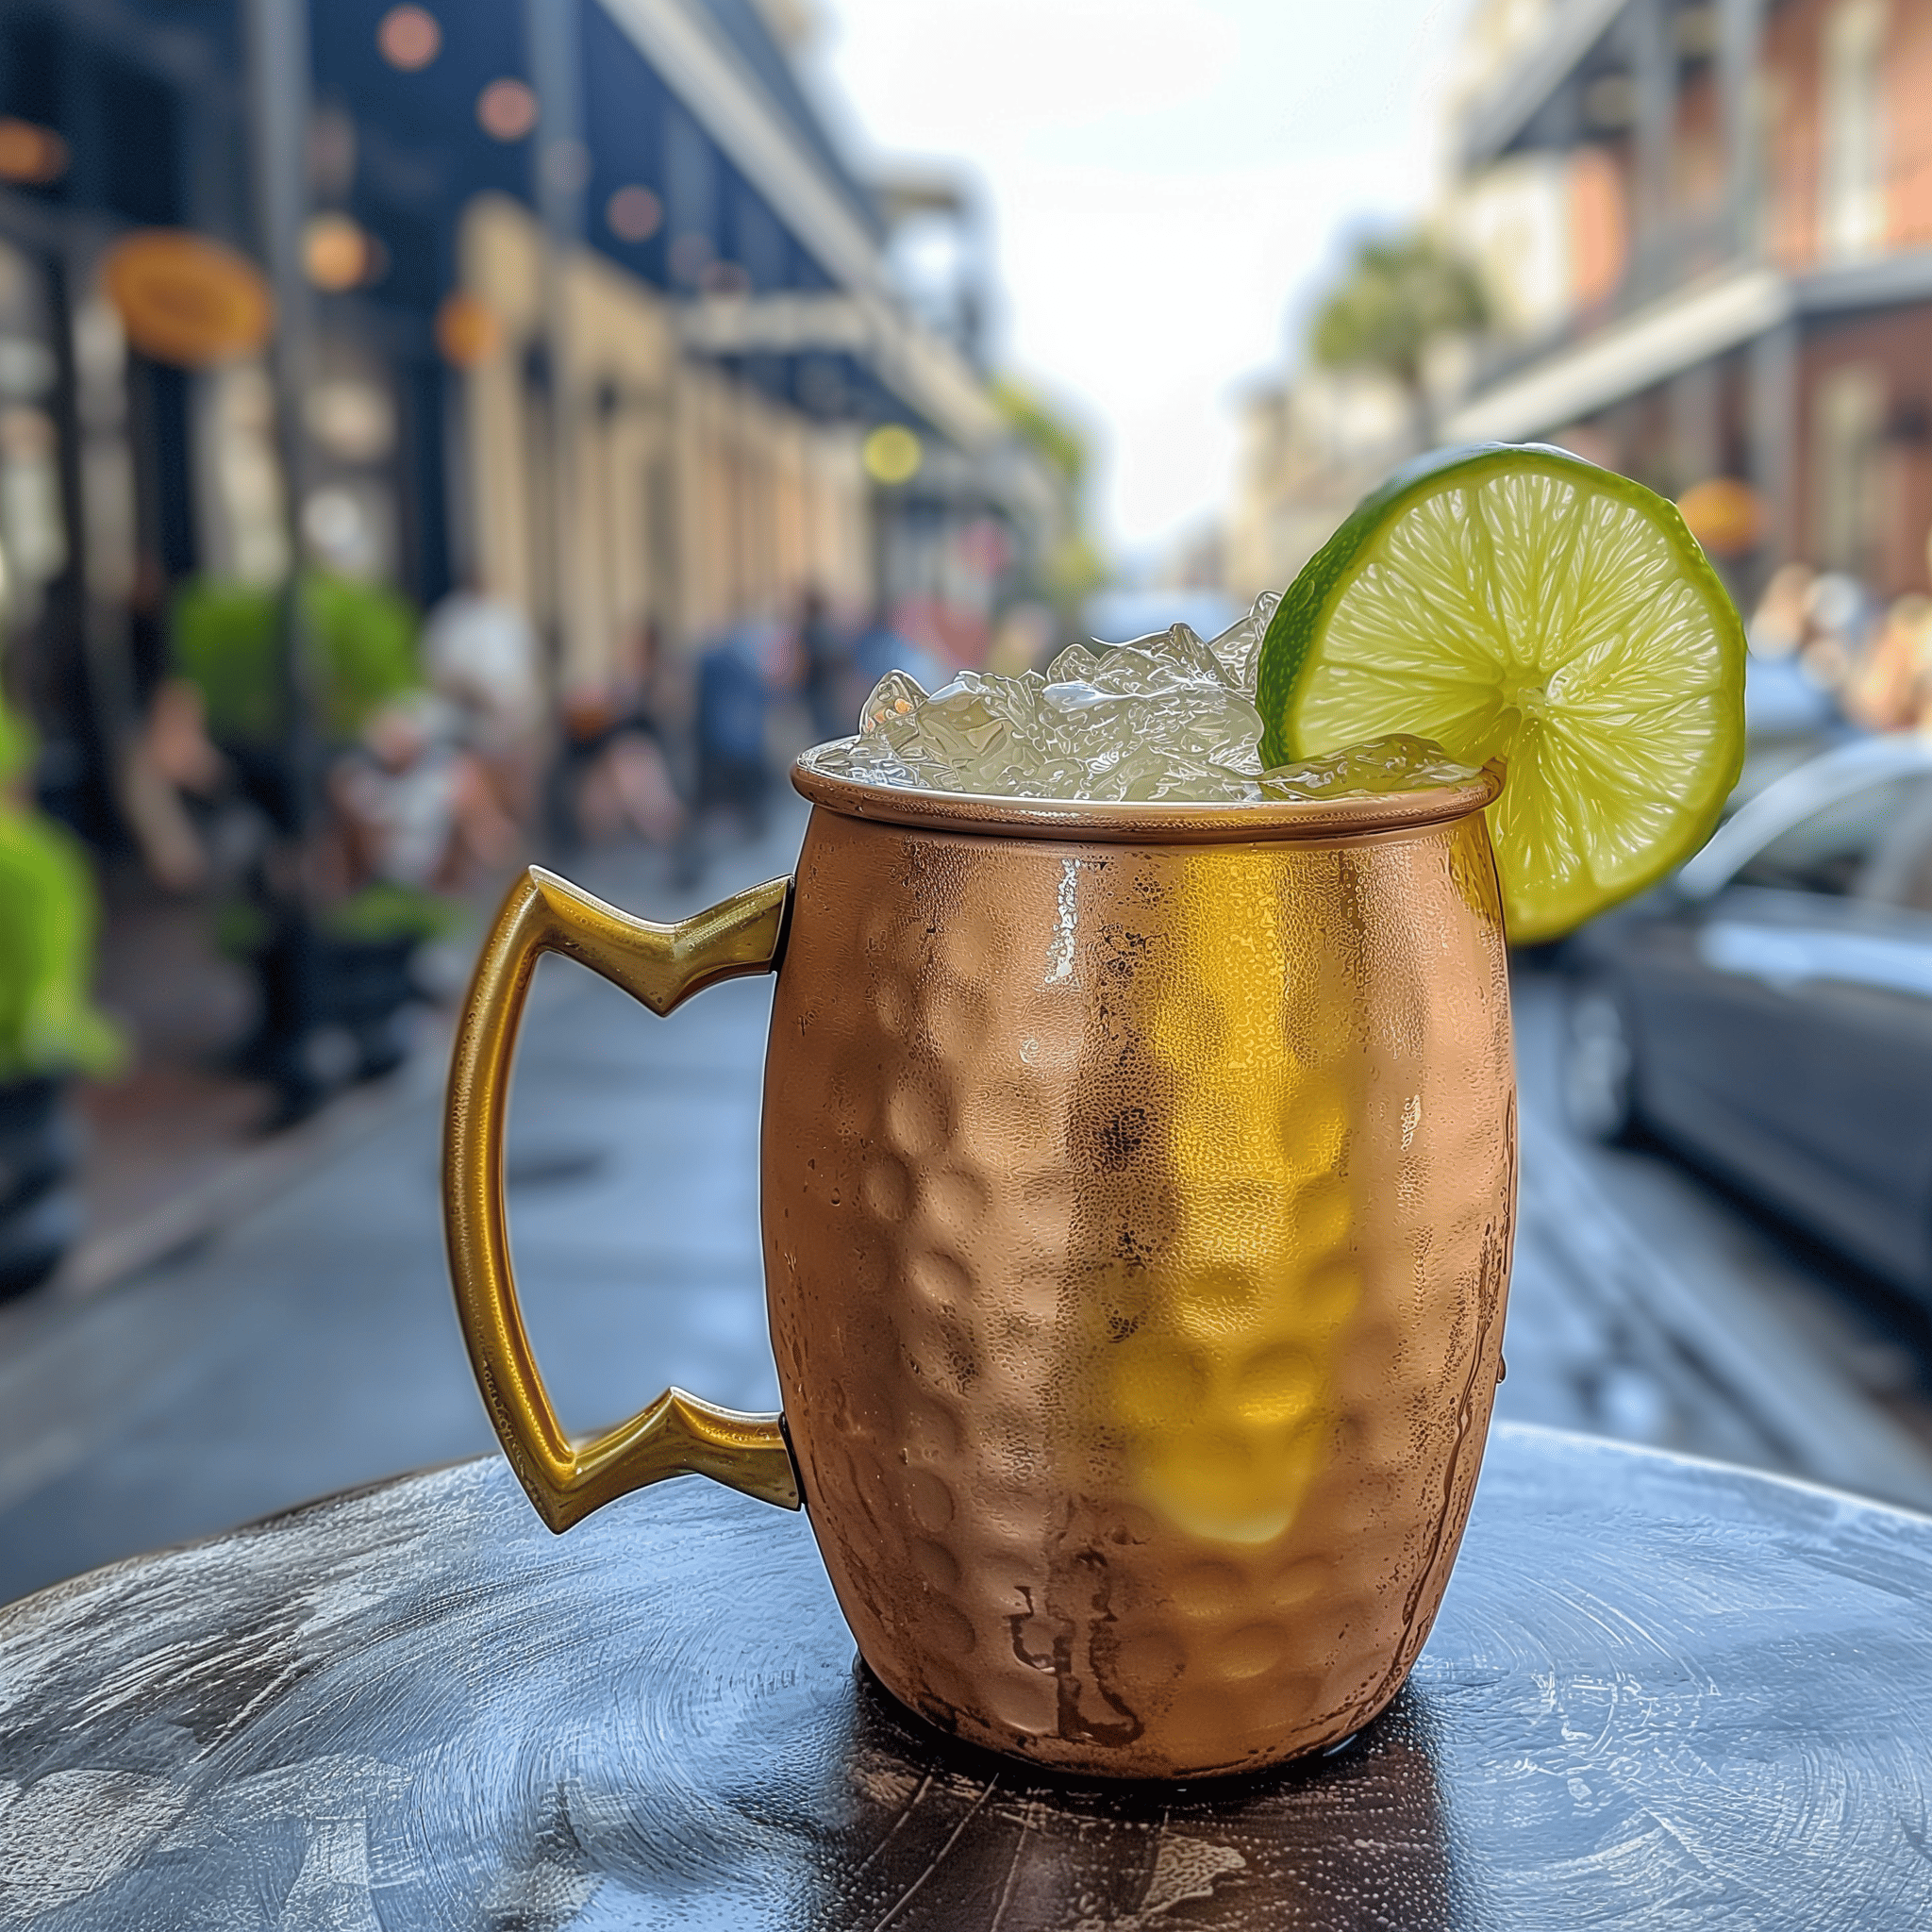 New Orleans Mule Cocktail Recipe - The New Orleans Mule offers a delightful balance of sweet pineapple juice with the sharp, spicy kick of ginger beer. The fresh lime juice adds a zesty tang, making it a refreshingly complex cocktail that's both invigorating and satisfying.